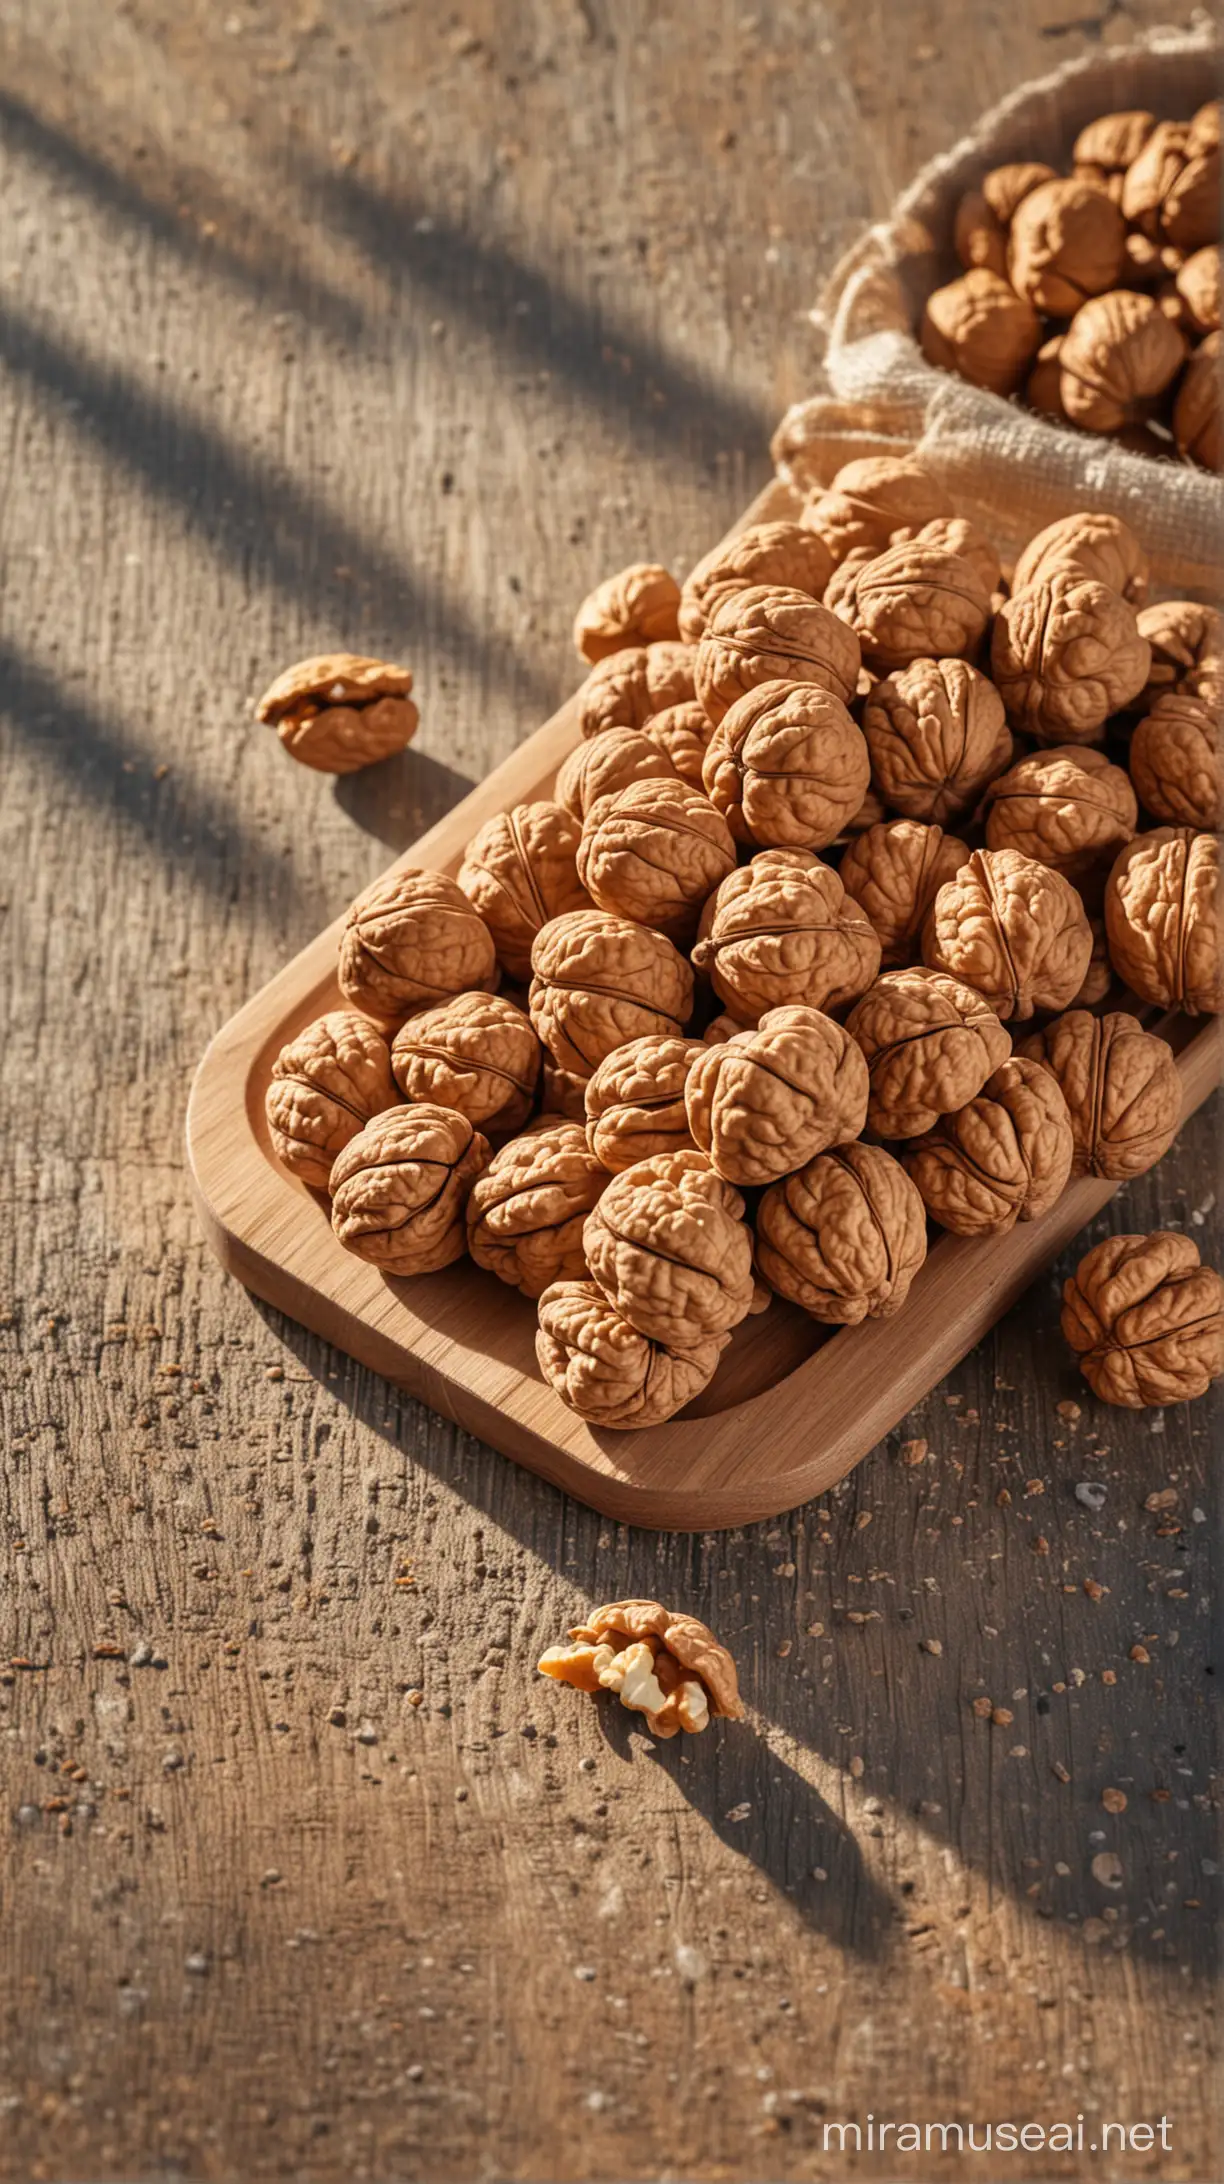 Walnuts on table, natural background, sun light effect, 4k, HDR, morning time weather